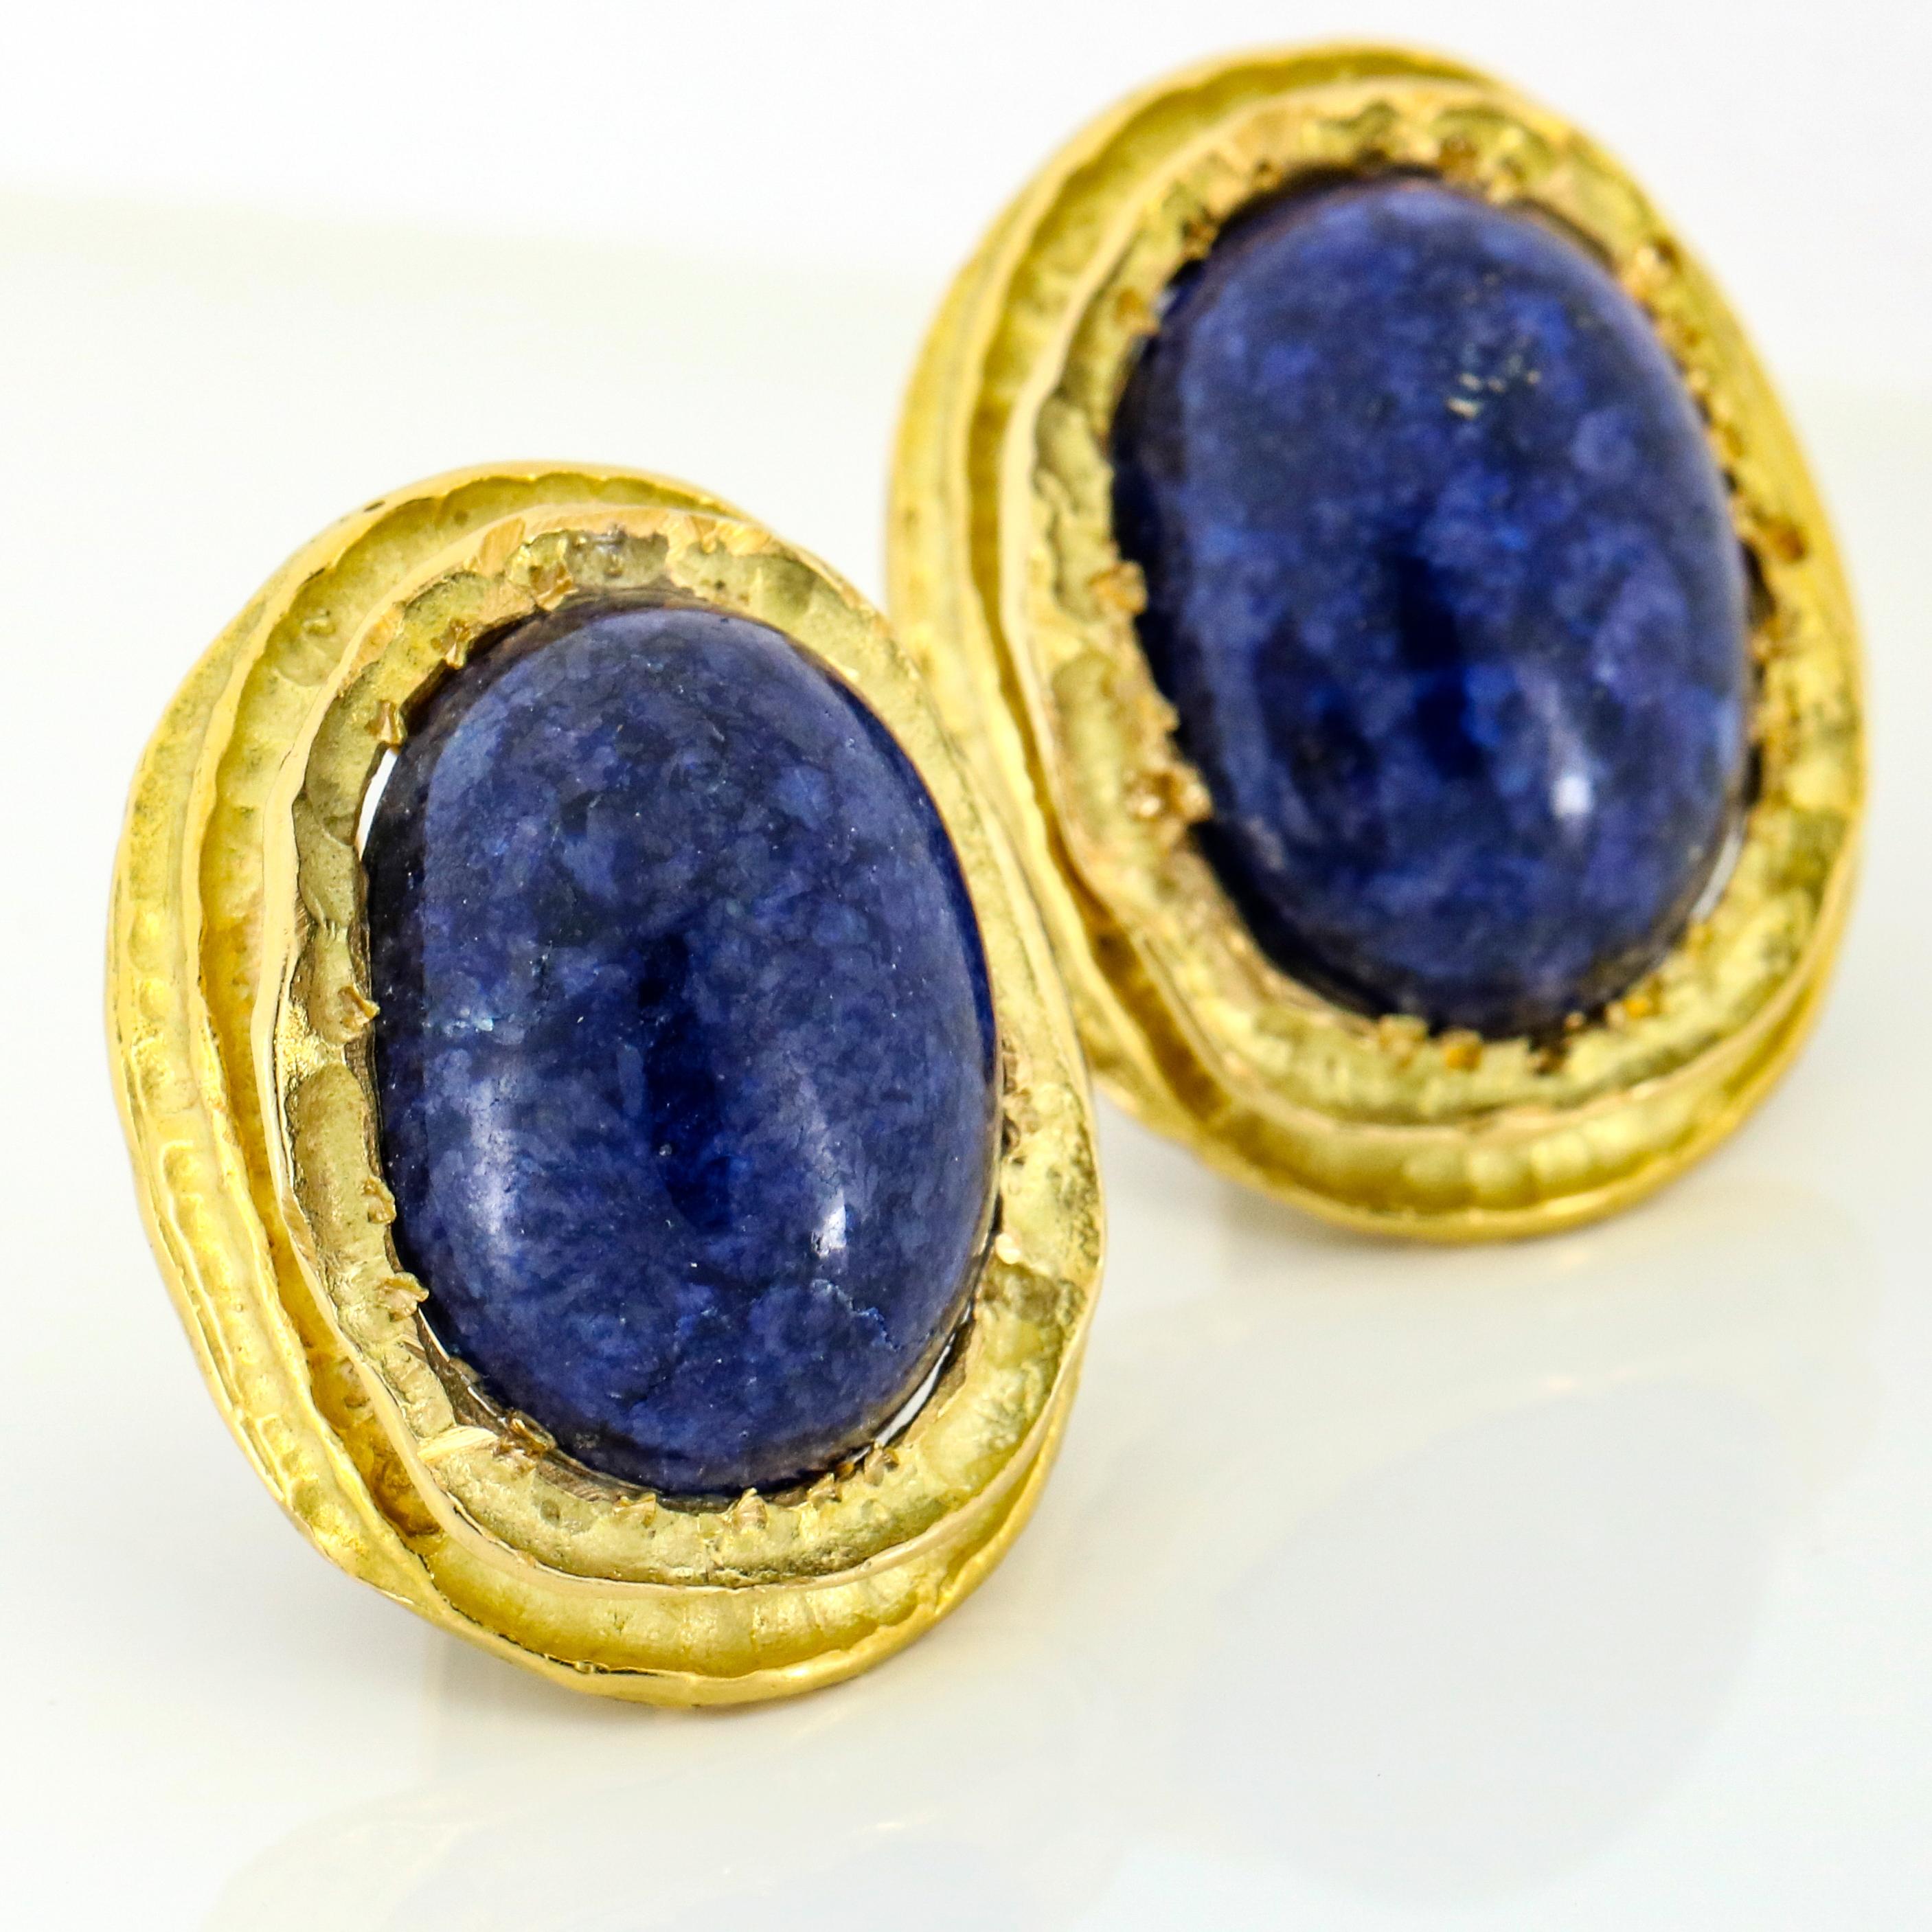 Franck's 18 Karat Yellow Gold Sodalite Clip-On Earrings In Excellent Condition For Sale In Fort Lauderdale, FL